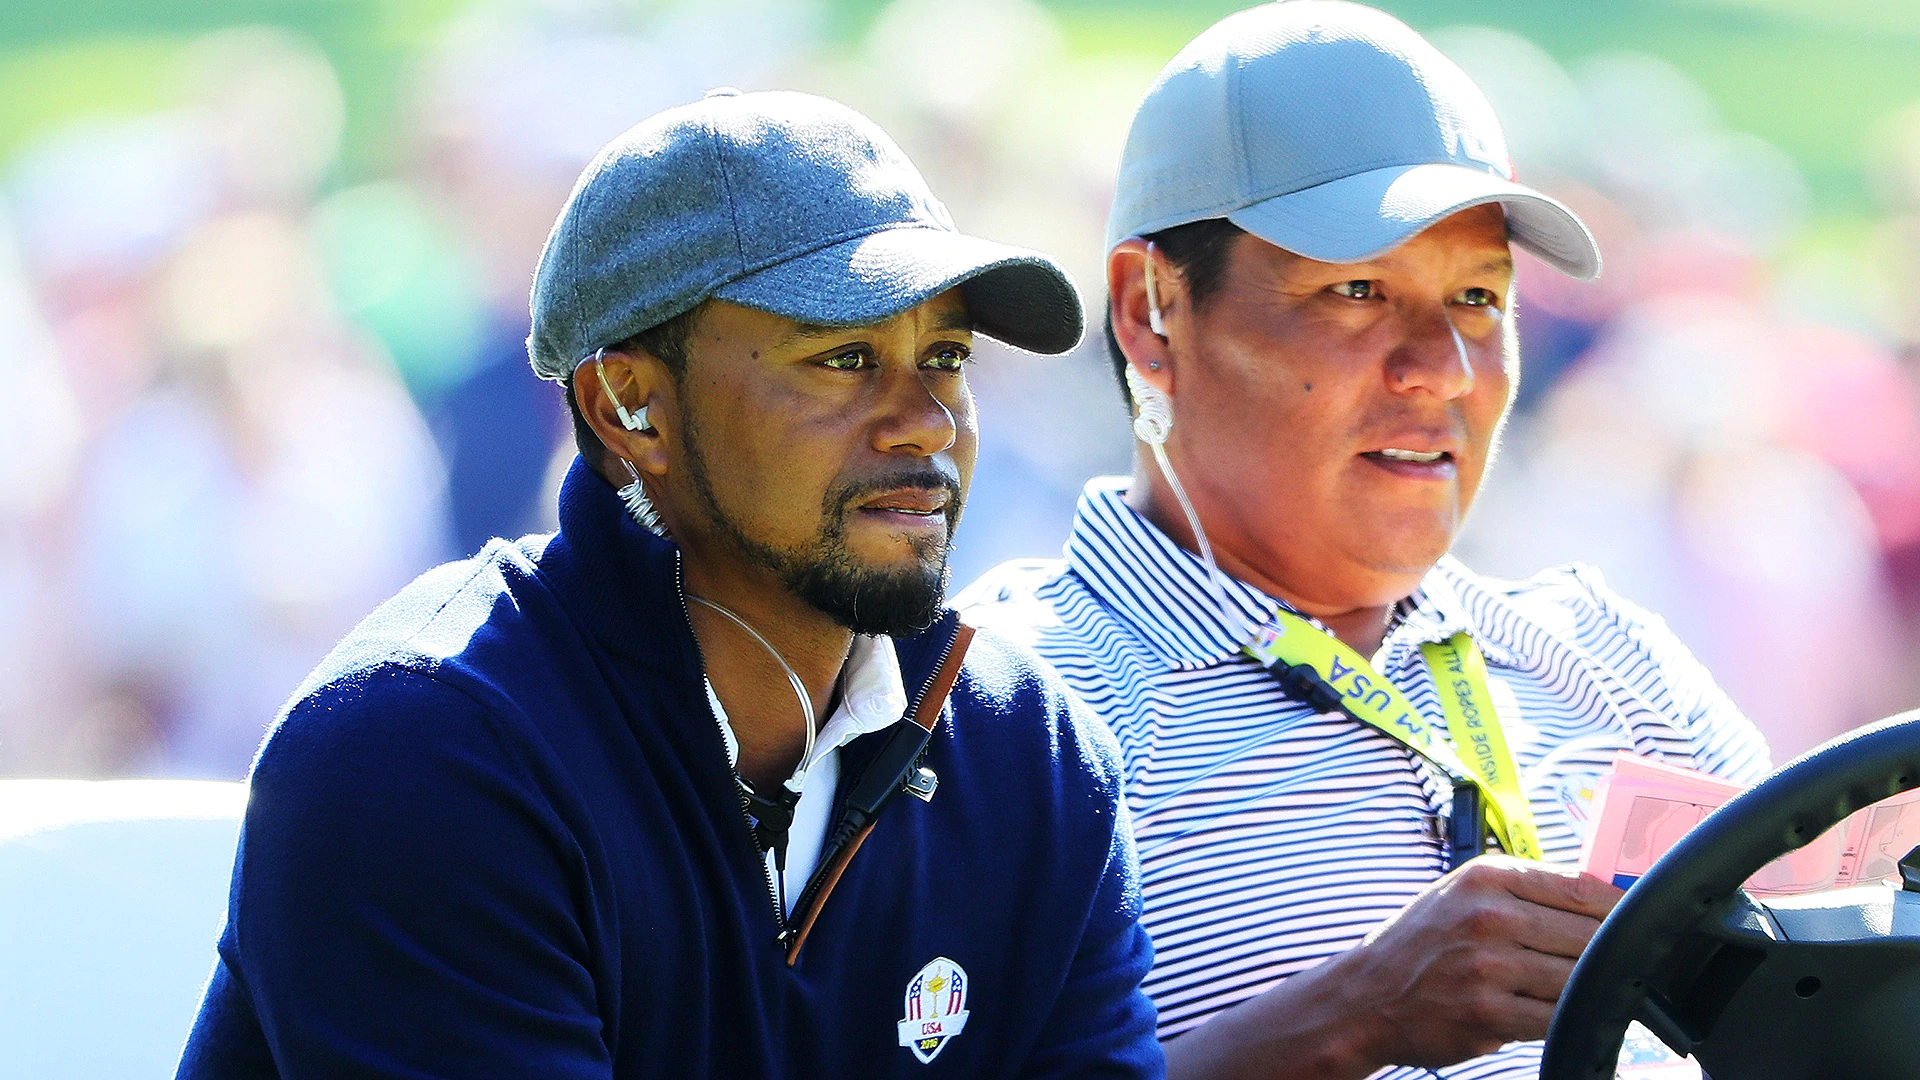 Begay on Tiger: 'Didn’t think it was going this well'